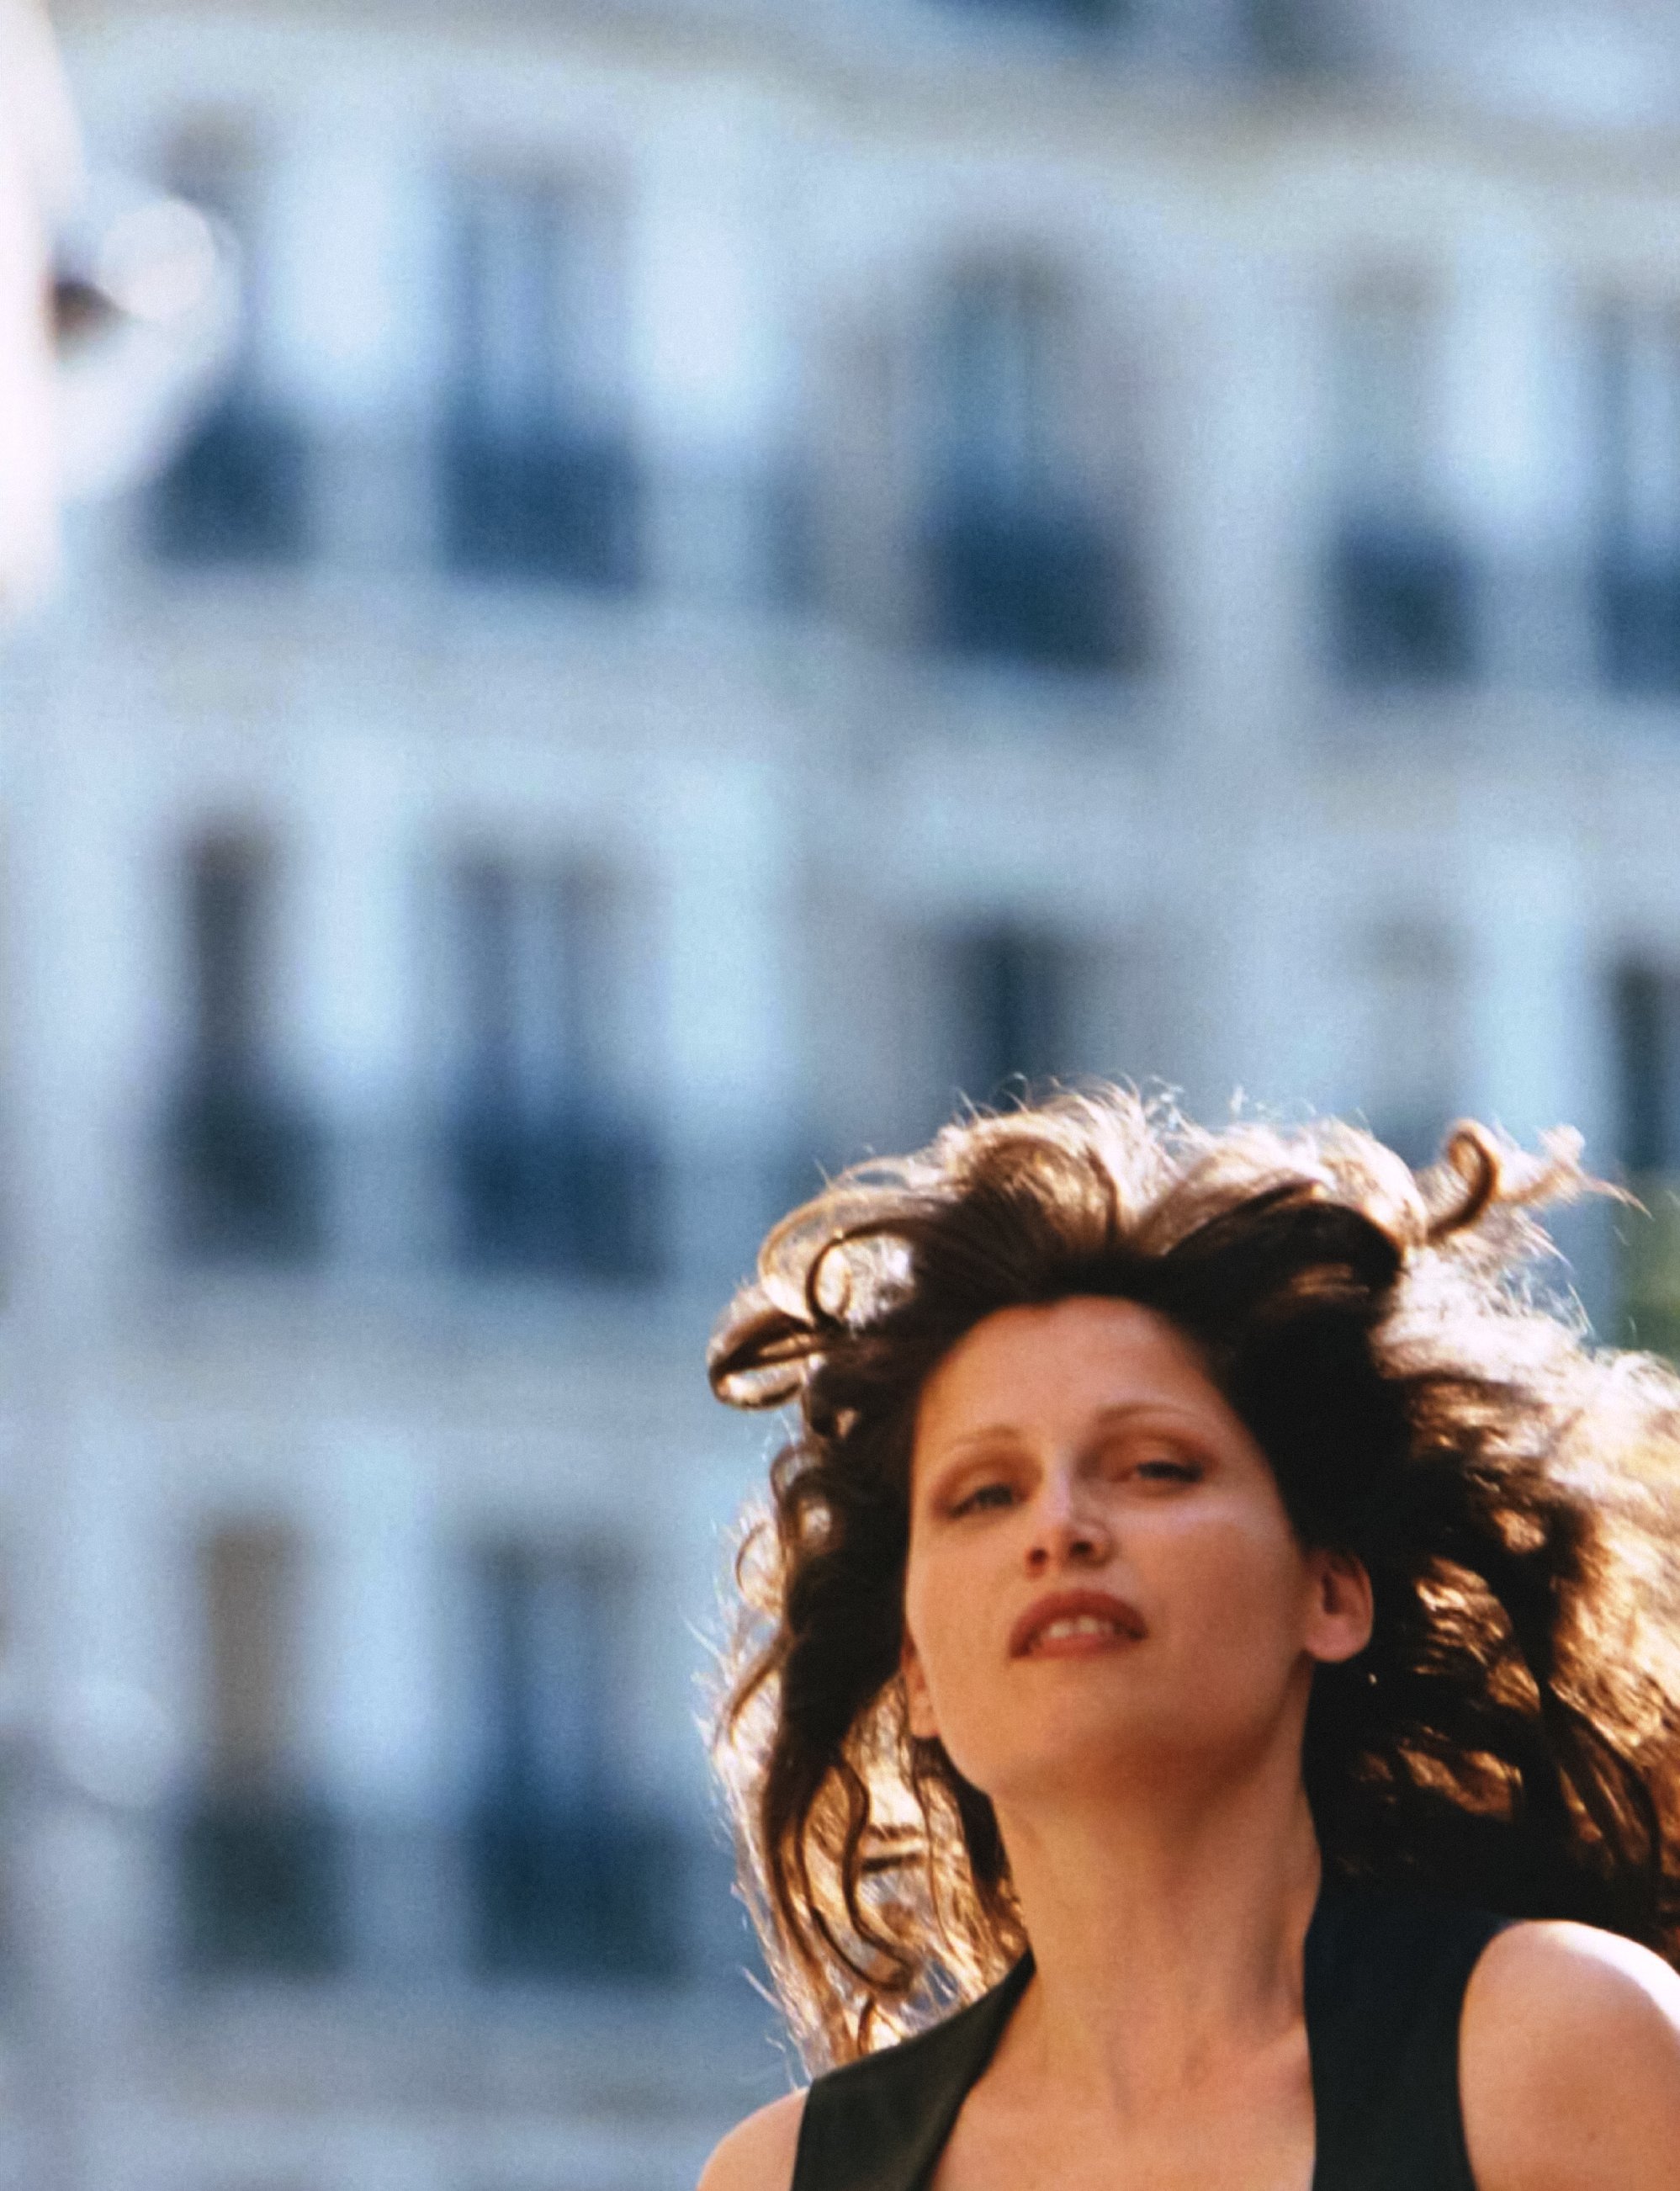 Laetitia-Casta-by-Oliver-Hadlee-Pearch-Harpers-Bazaar-France-00005.jpeg